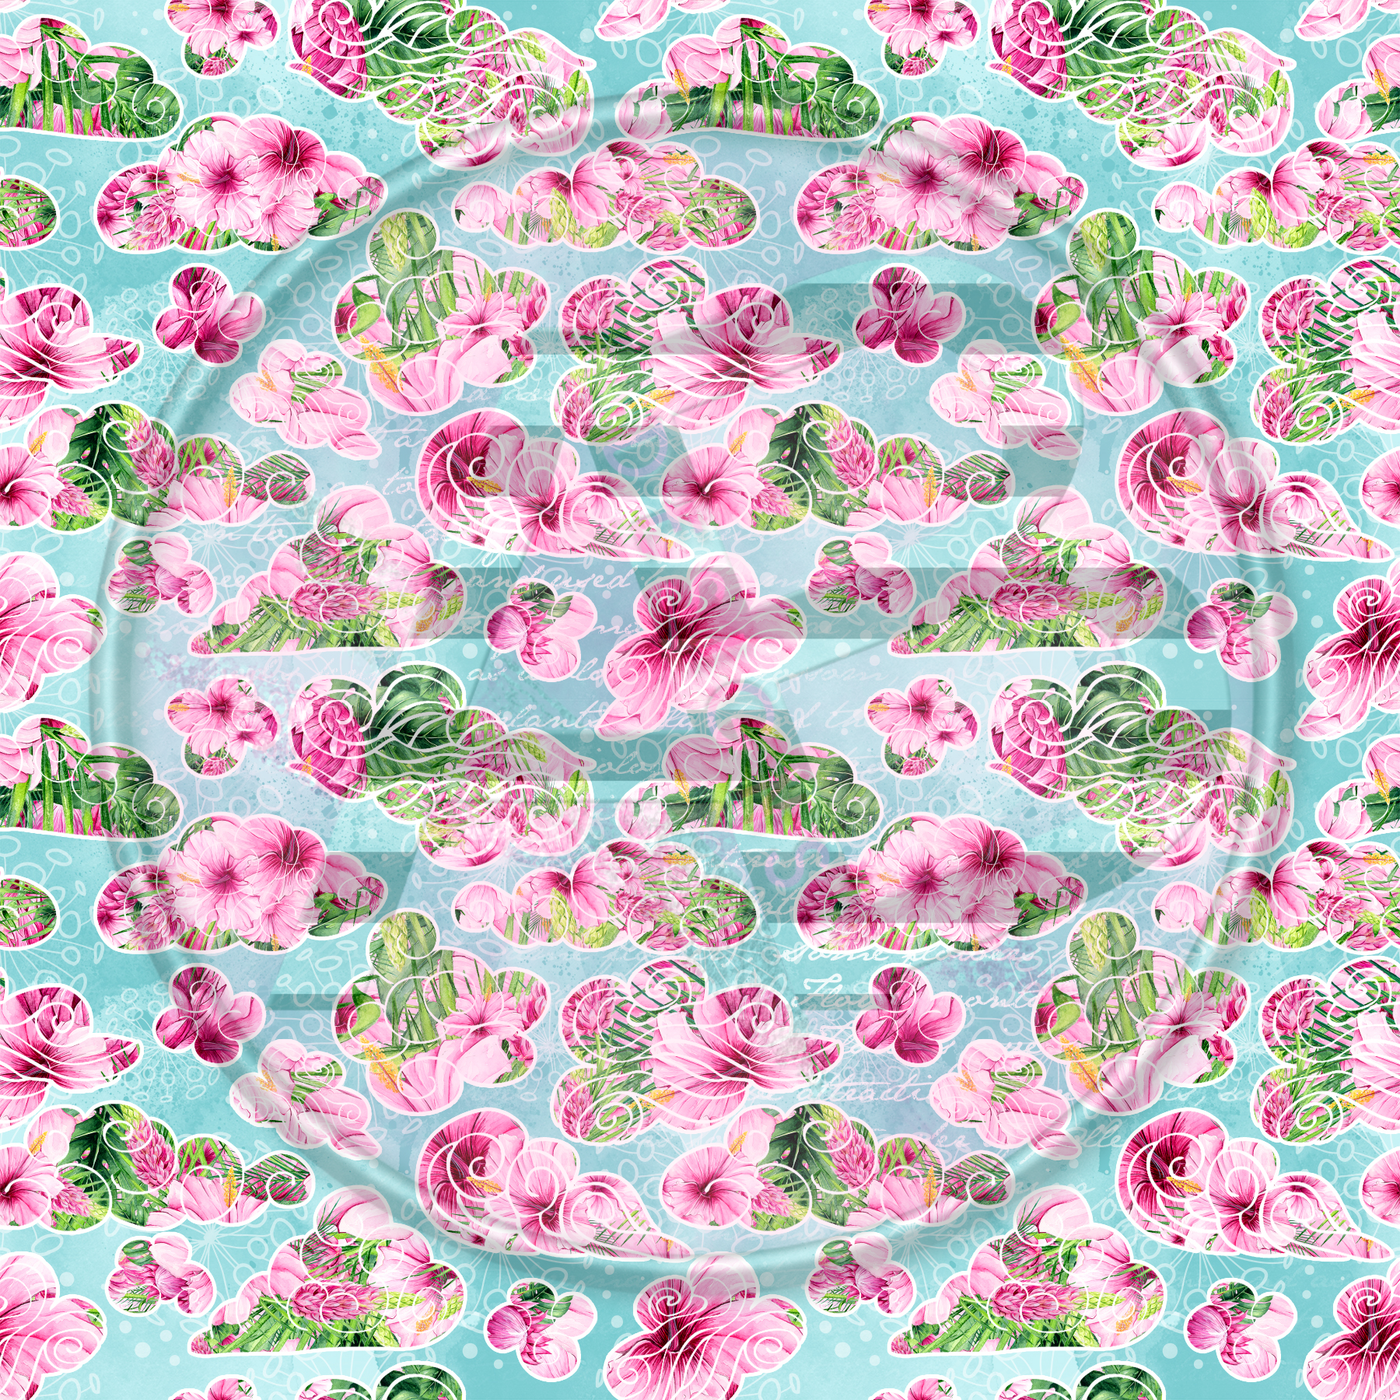 Adhesive Patterned Vinyl - Tropical Exotic Floral 44